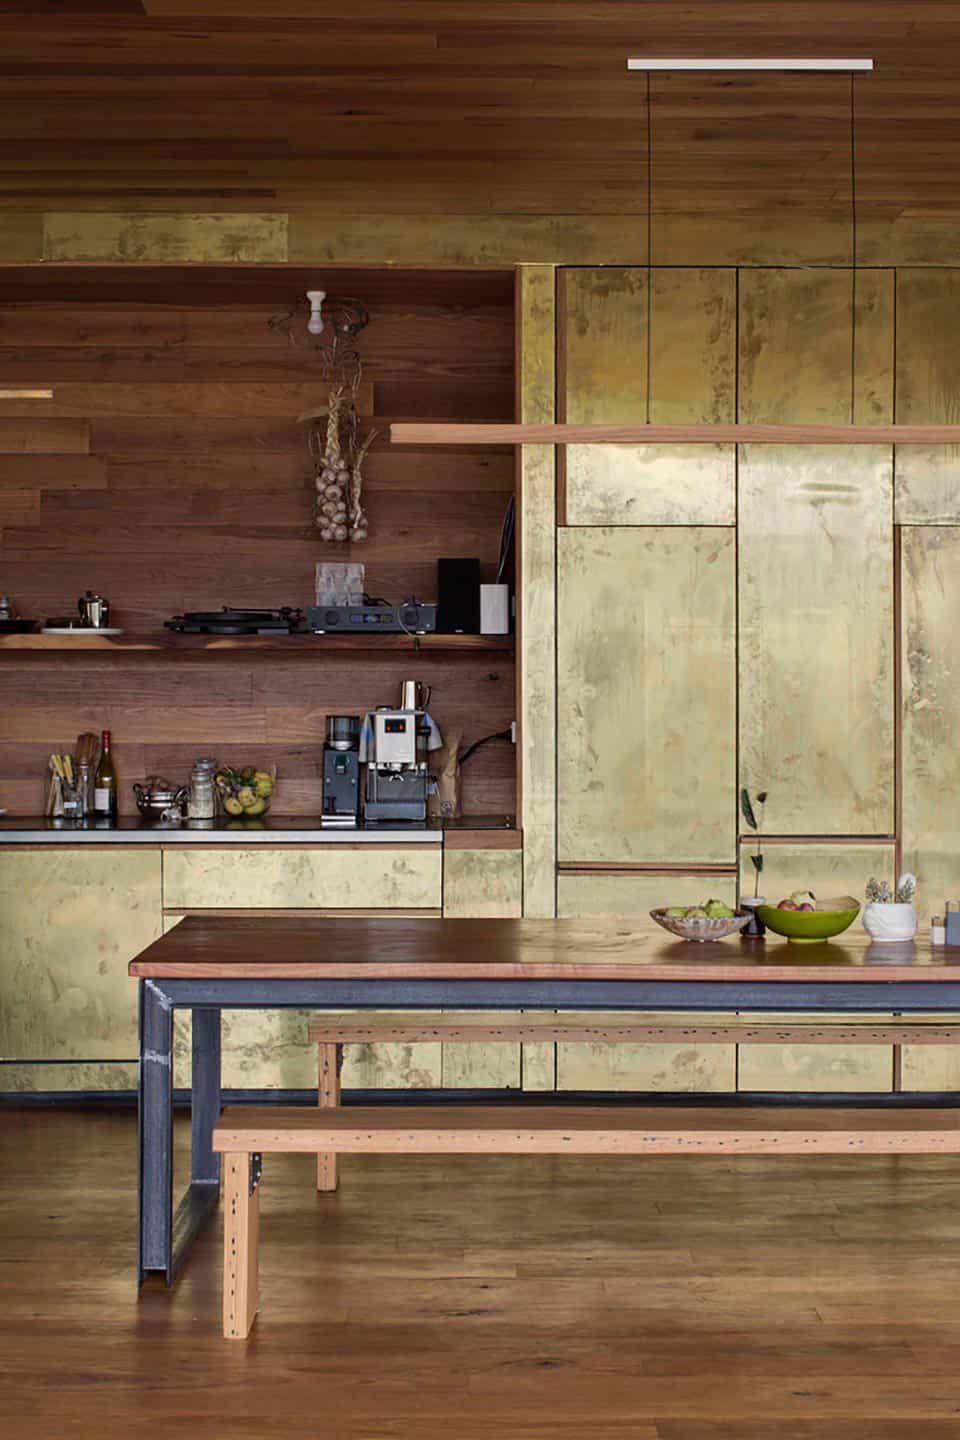 Kitchen cabinets are covered with brass